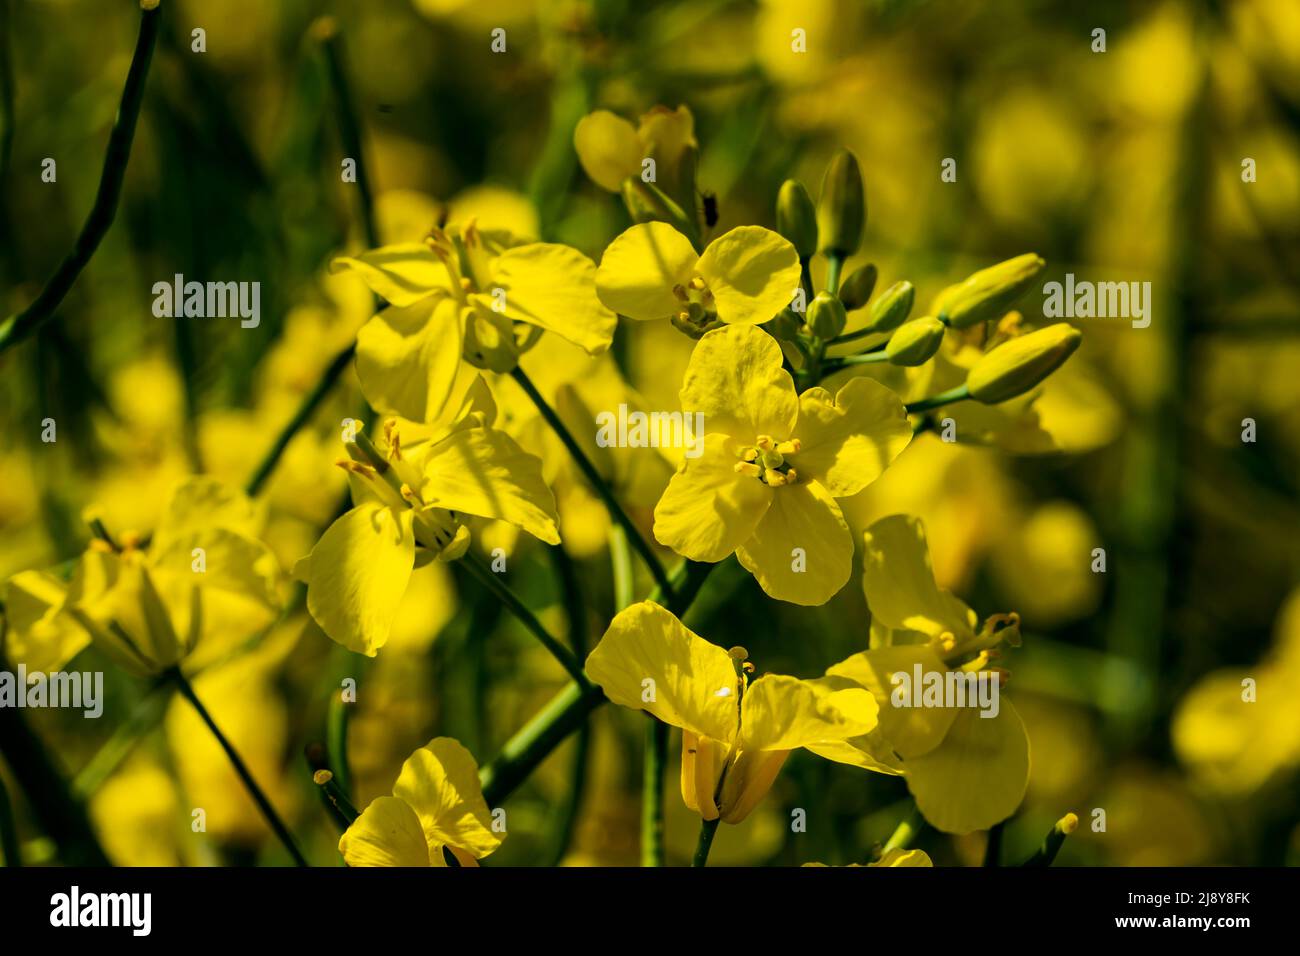 Close-up of a yellow inflorescence full of rapeseed flowers Stock Photo